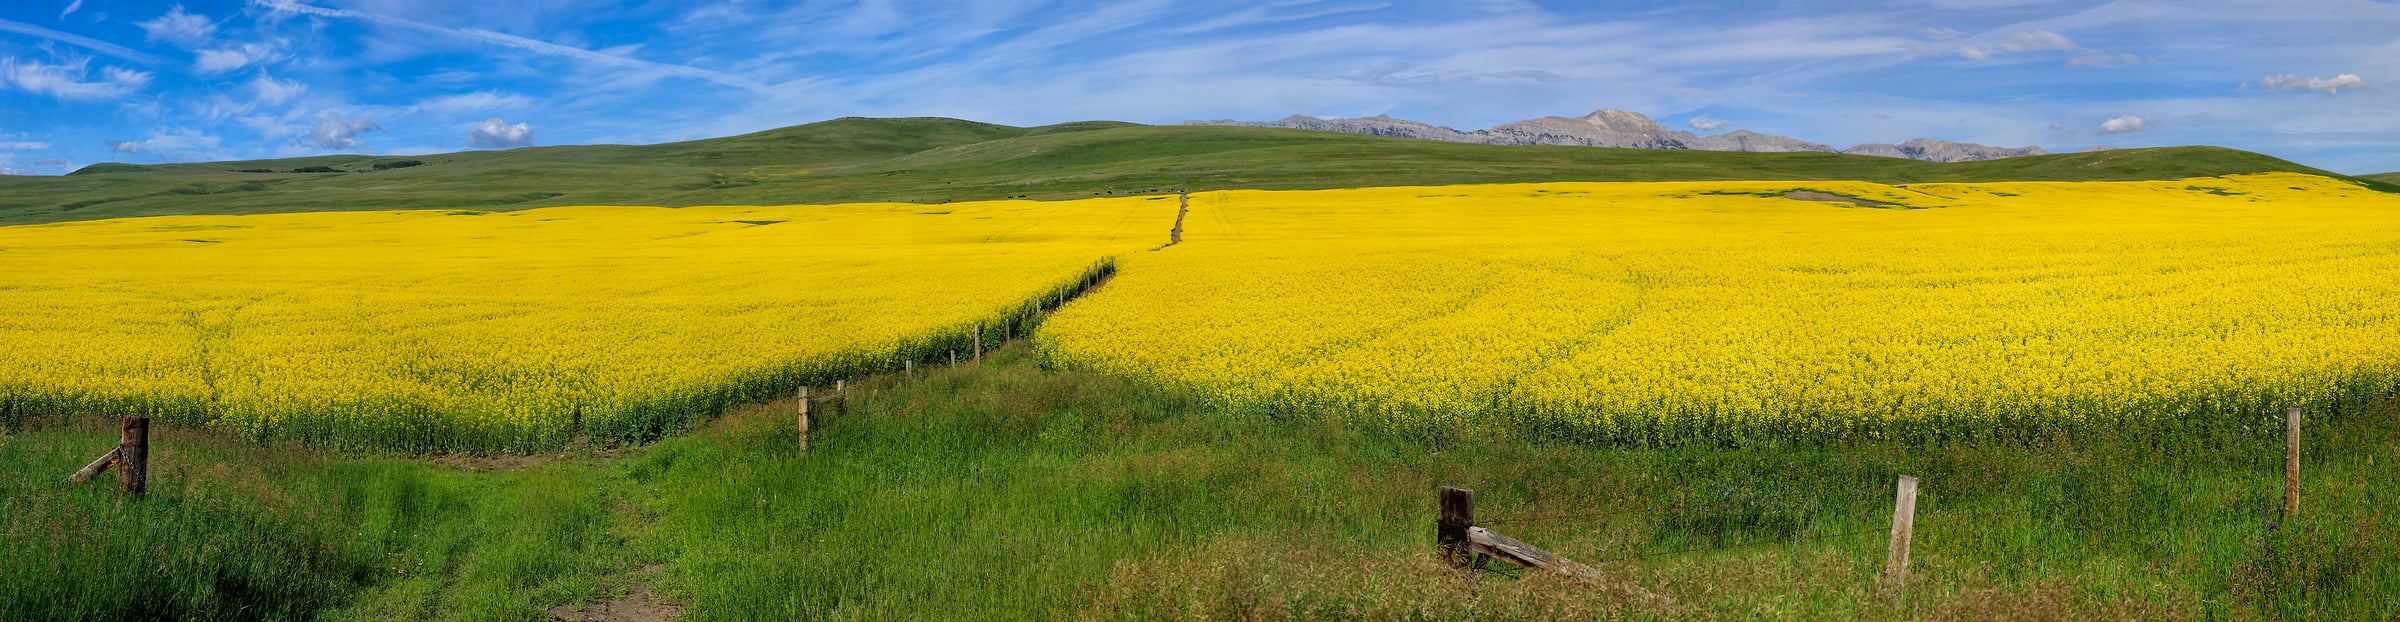 1,107 megapixels! A very high resolution, large-format VAST photo print of a canola field; landscape photograph created by Scott Dimond in Cowboy Trial, Alberta, Canada.